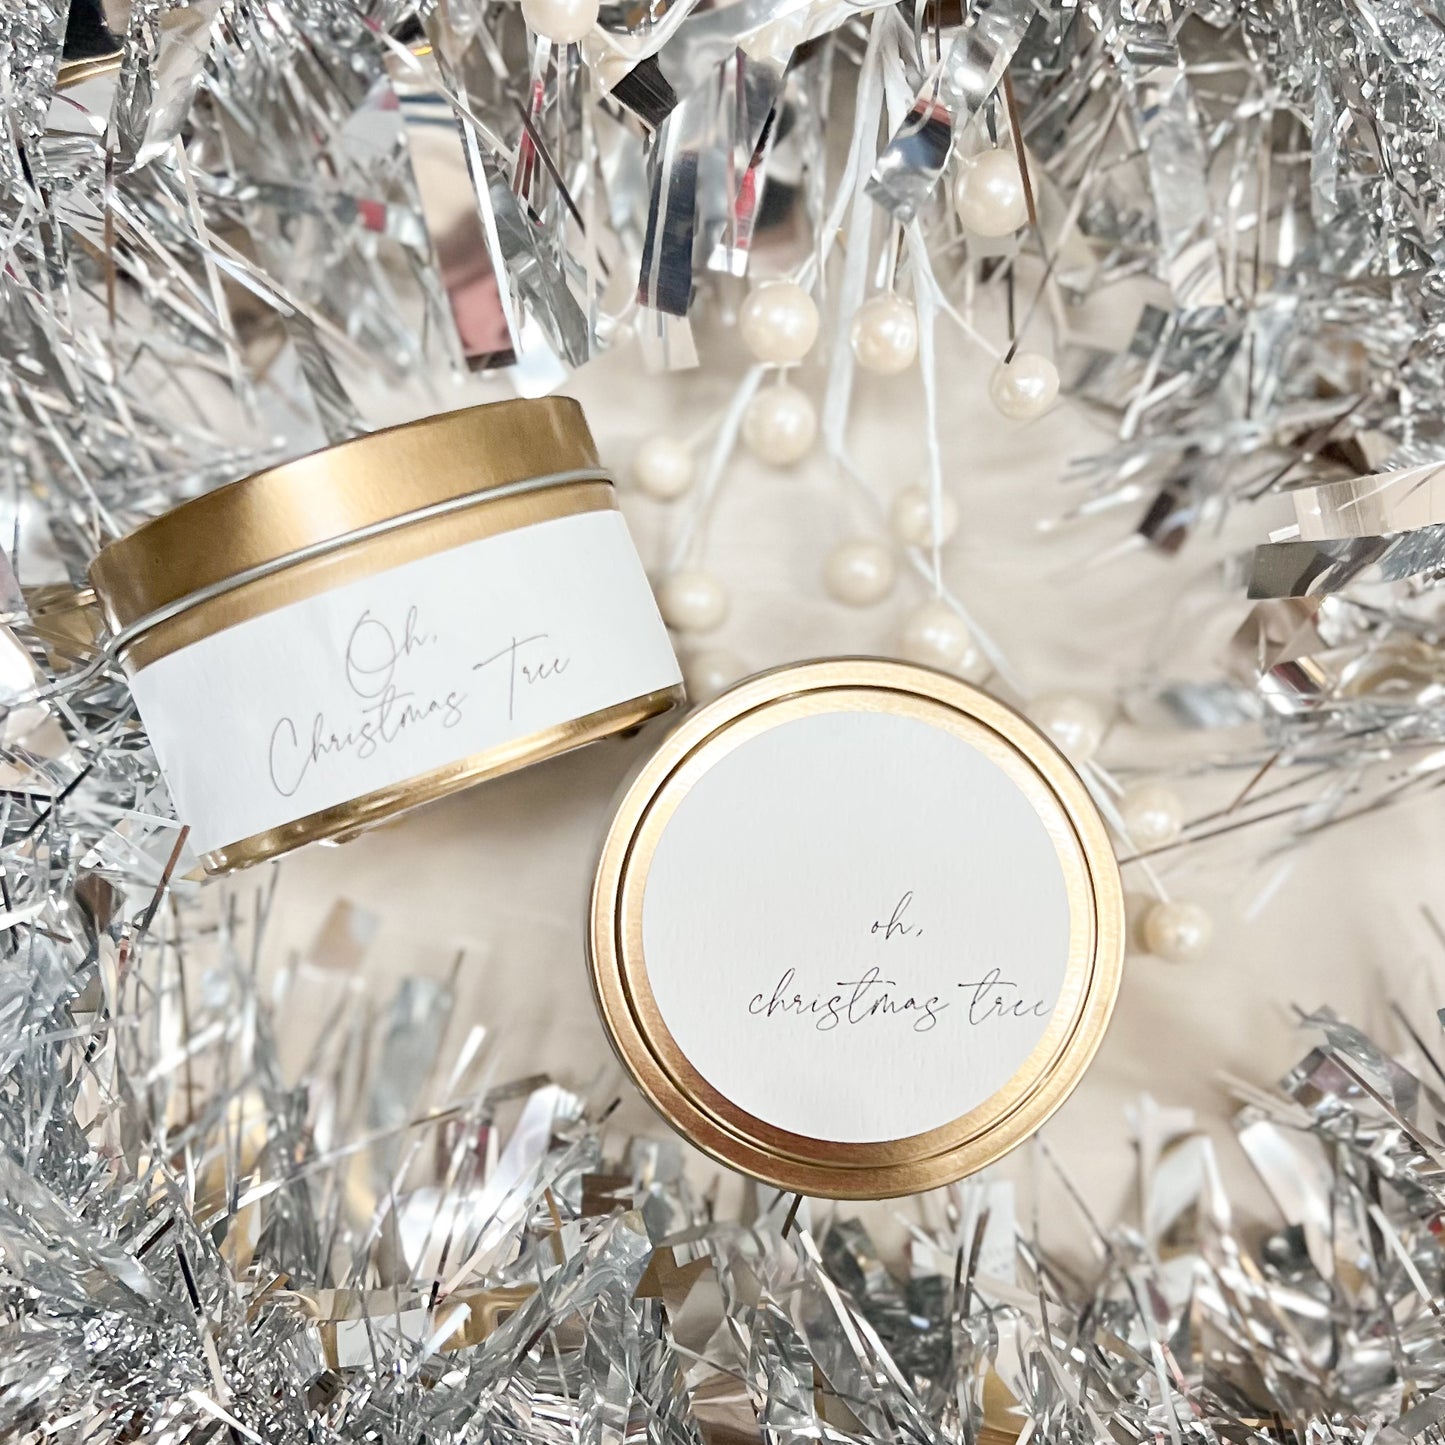 Oh, Christmas Tree Scented Candle Tin